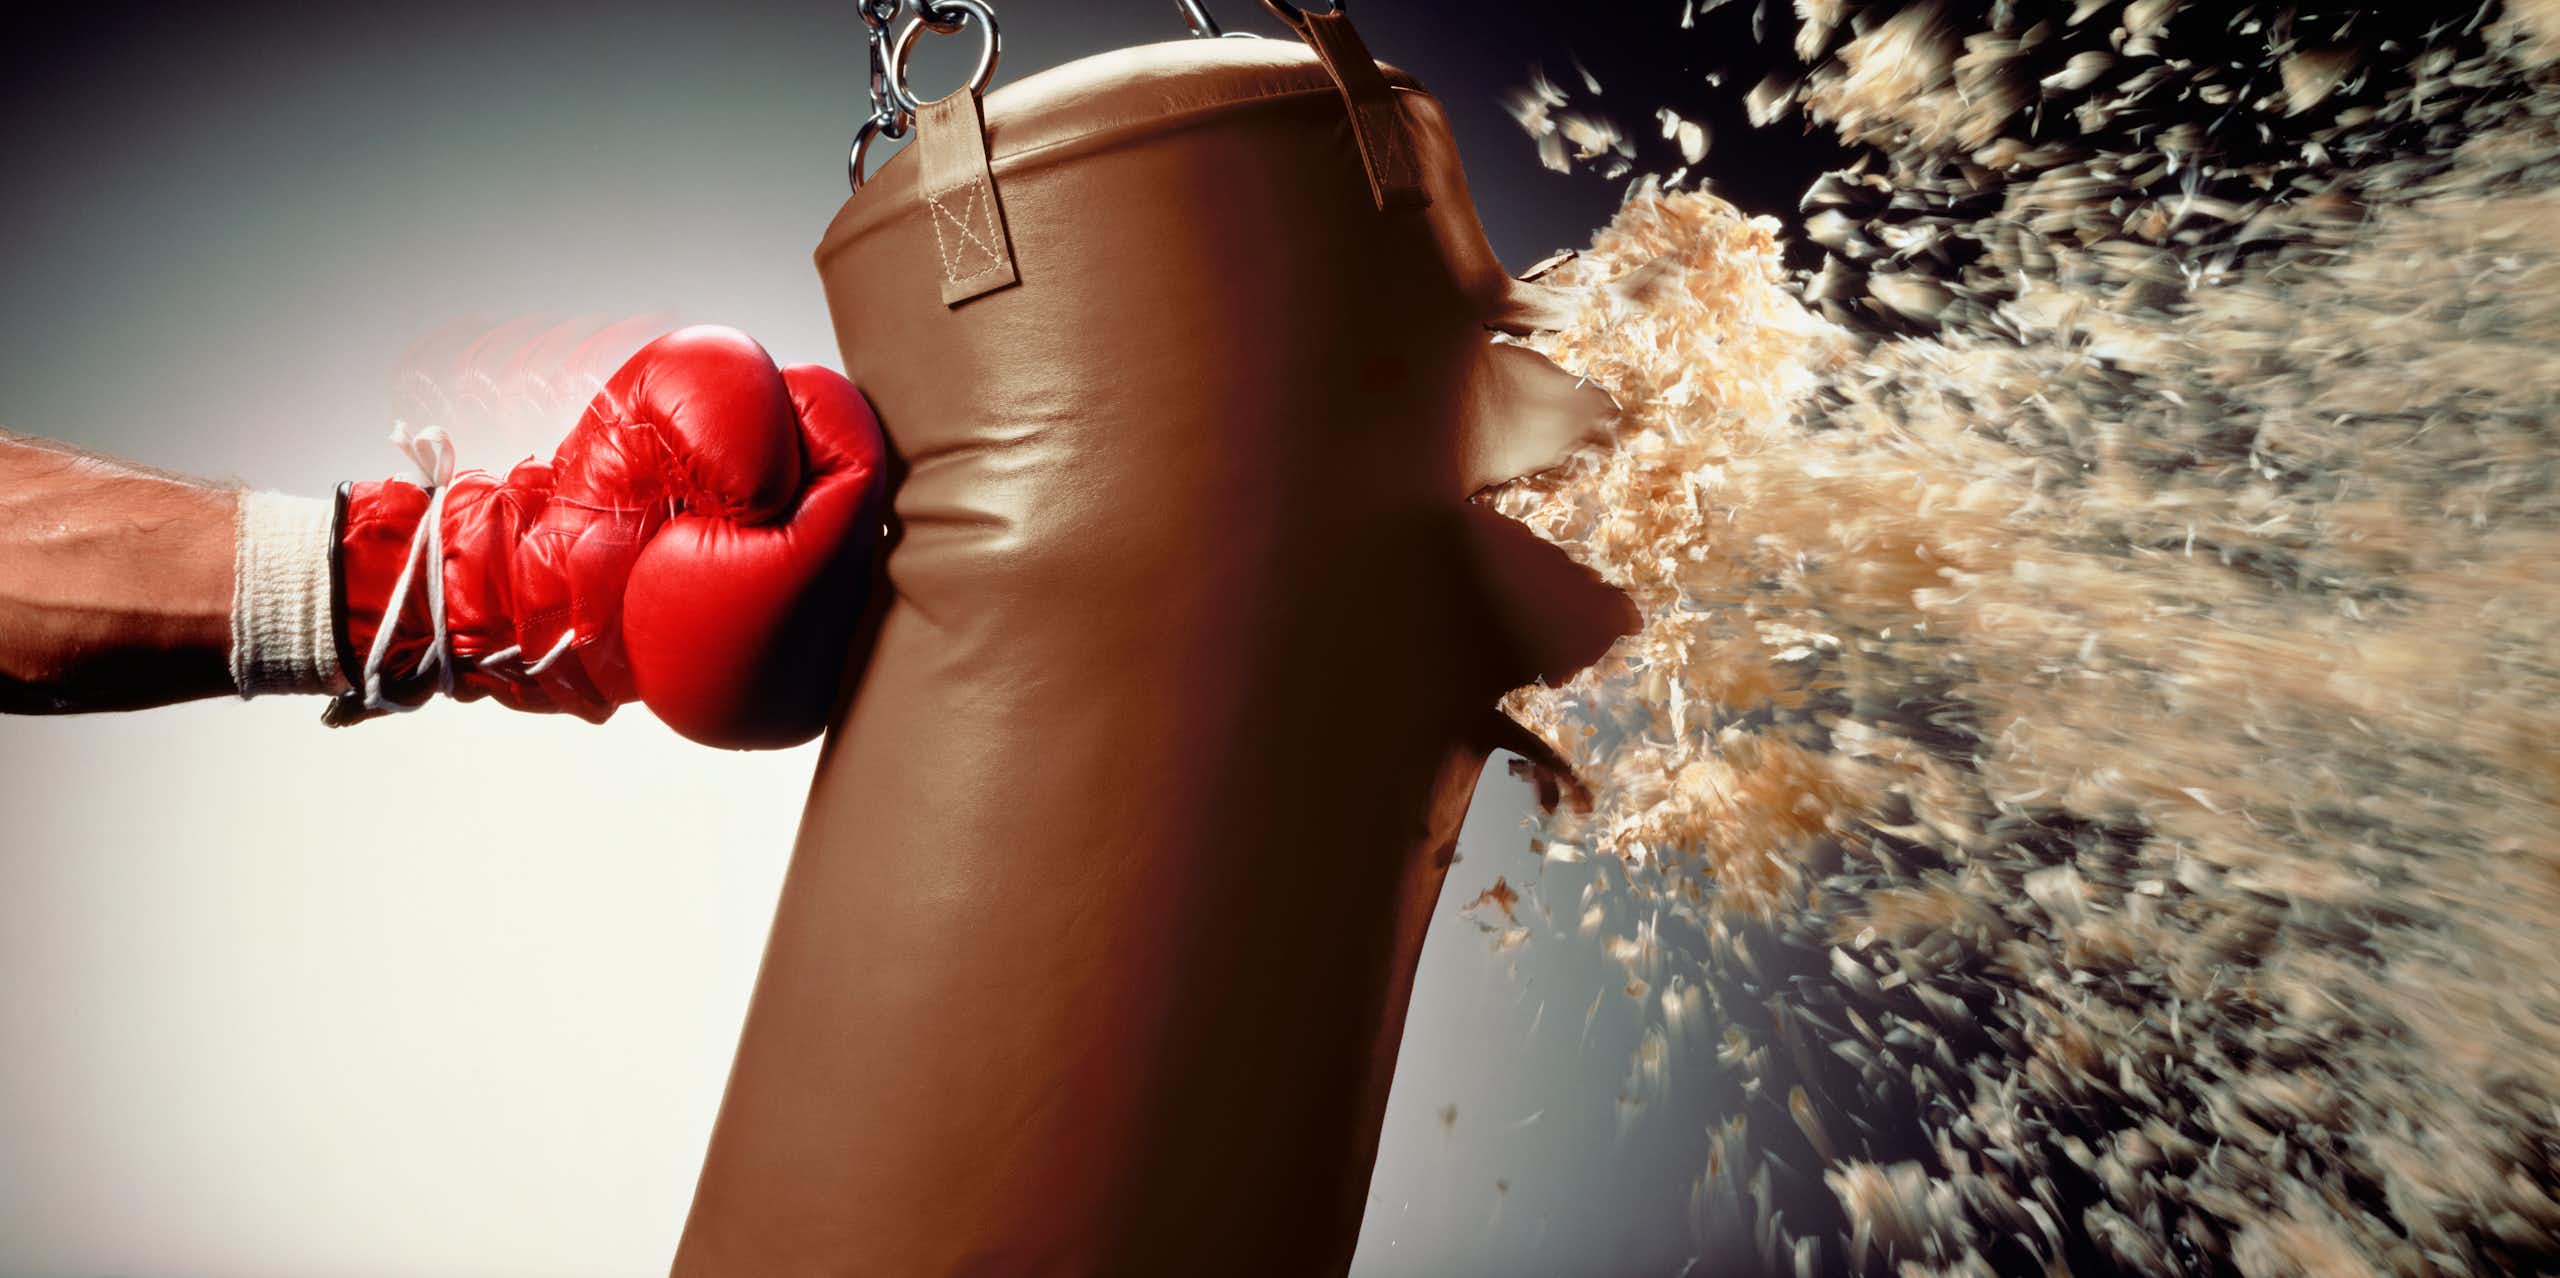 hand in boxing glove punches stuffing out of a heavy bag